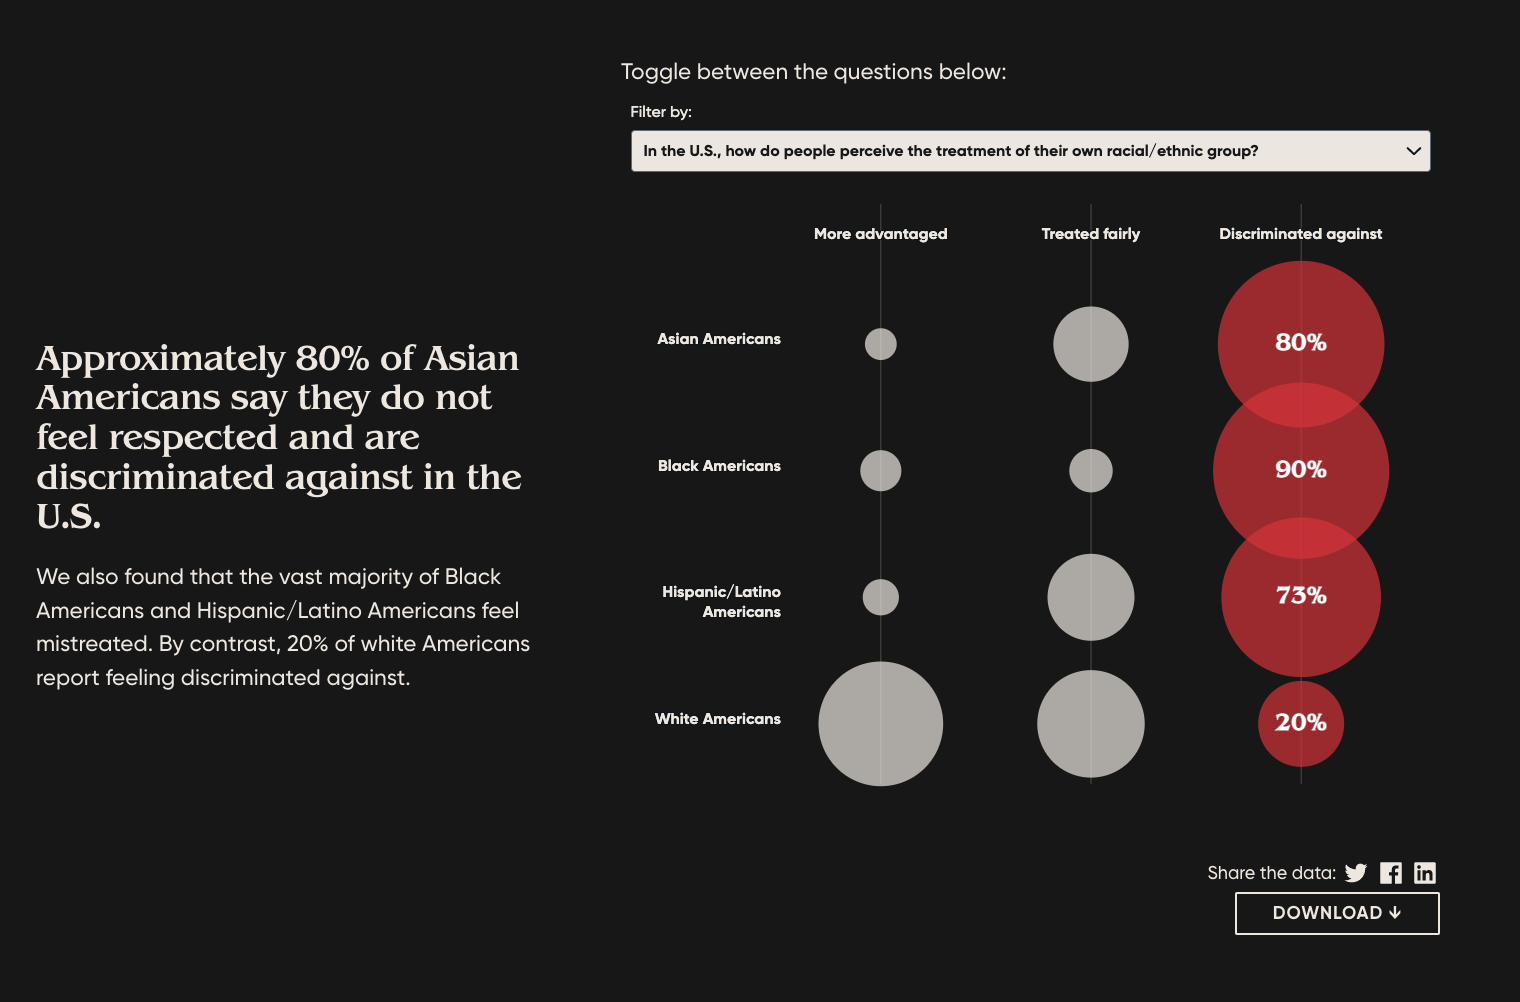 Approximately 80% of Asian Americans say they do not feel respected and are discriminated against in the U.S. We also found that the vast majority of Black Americans and Hispanic/Latino Americans feel mistreated. By contrast, 20% of white Americans report feeling discriminated against.